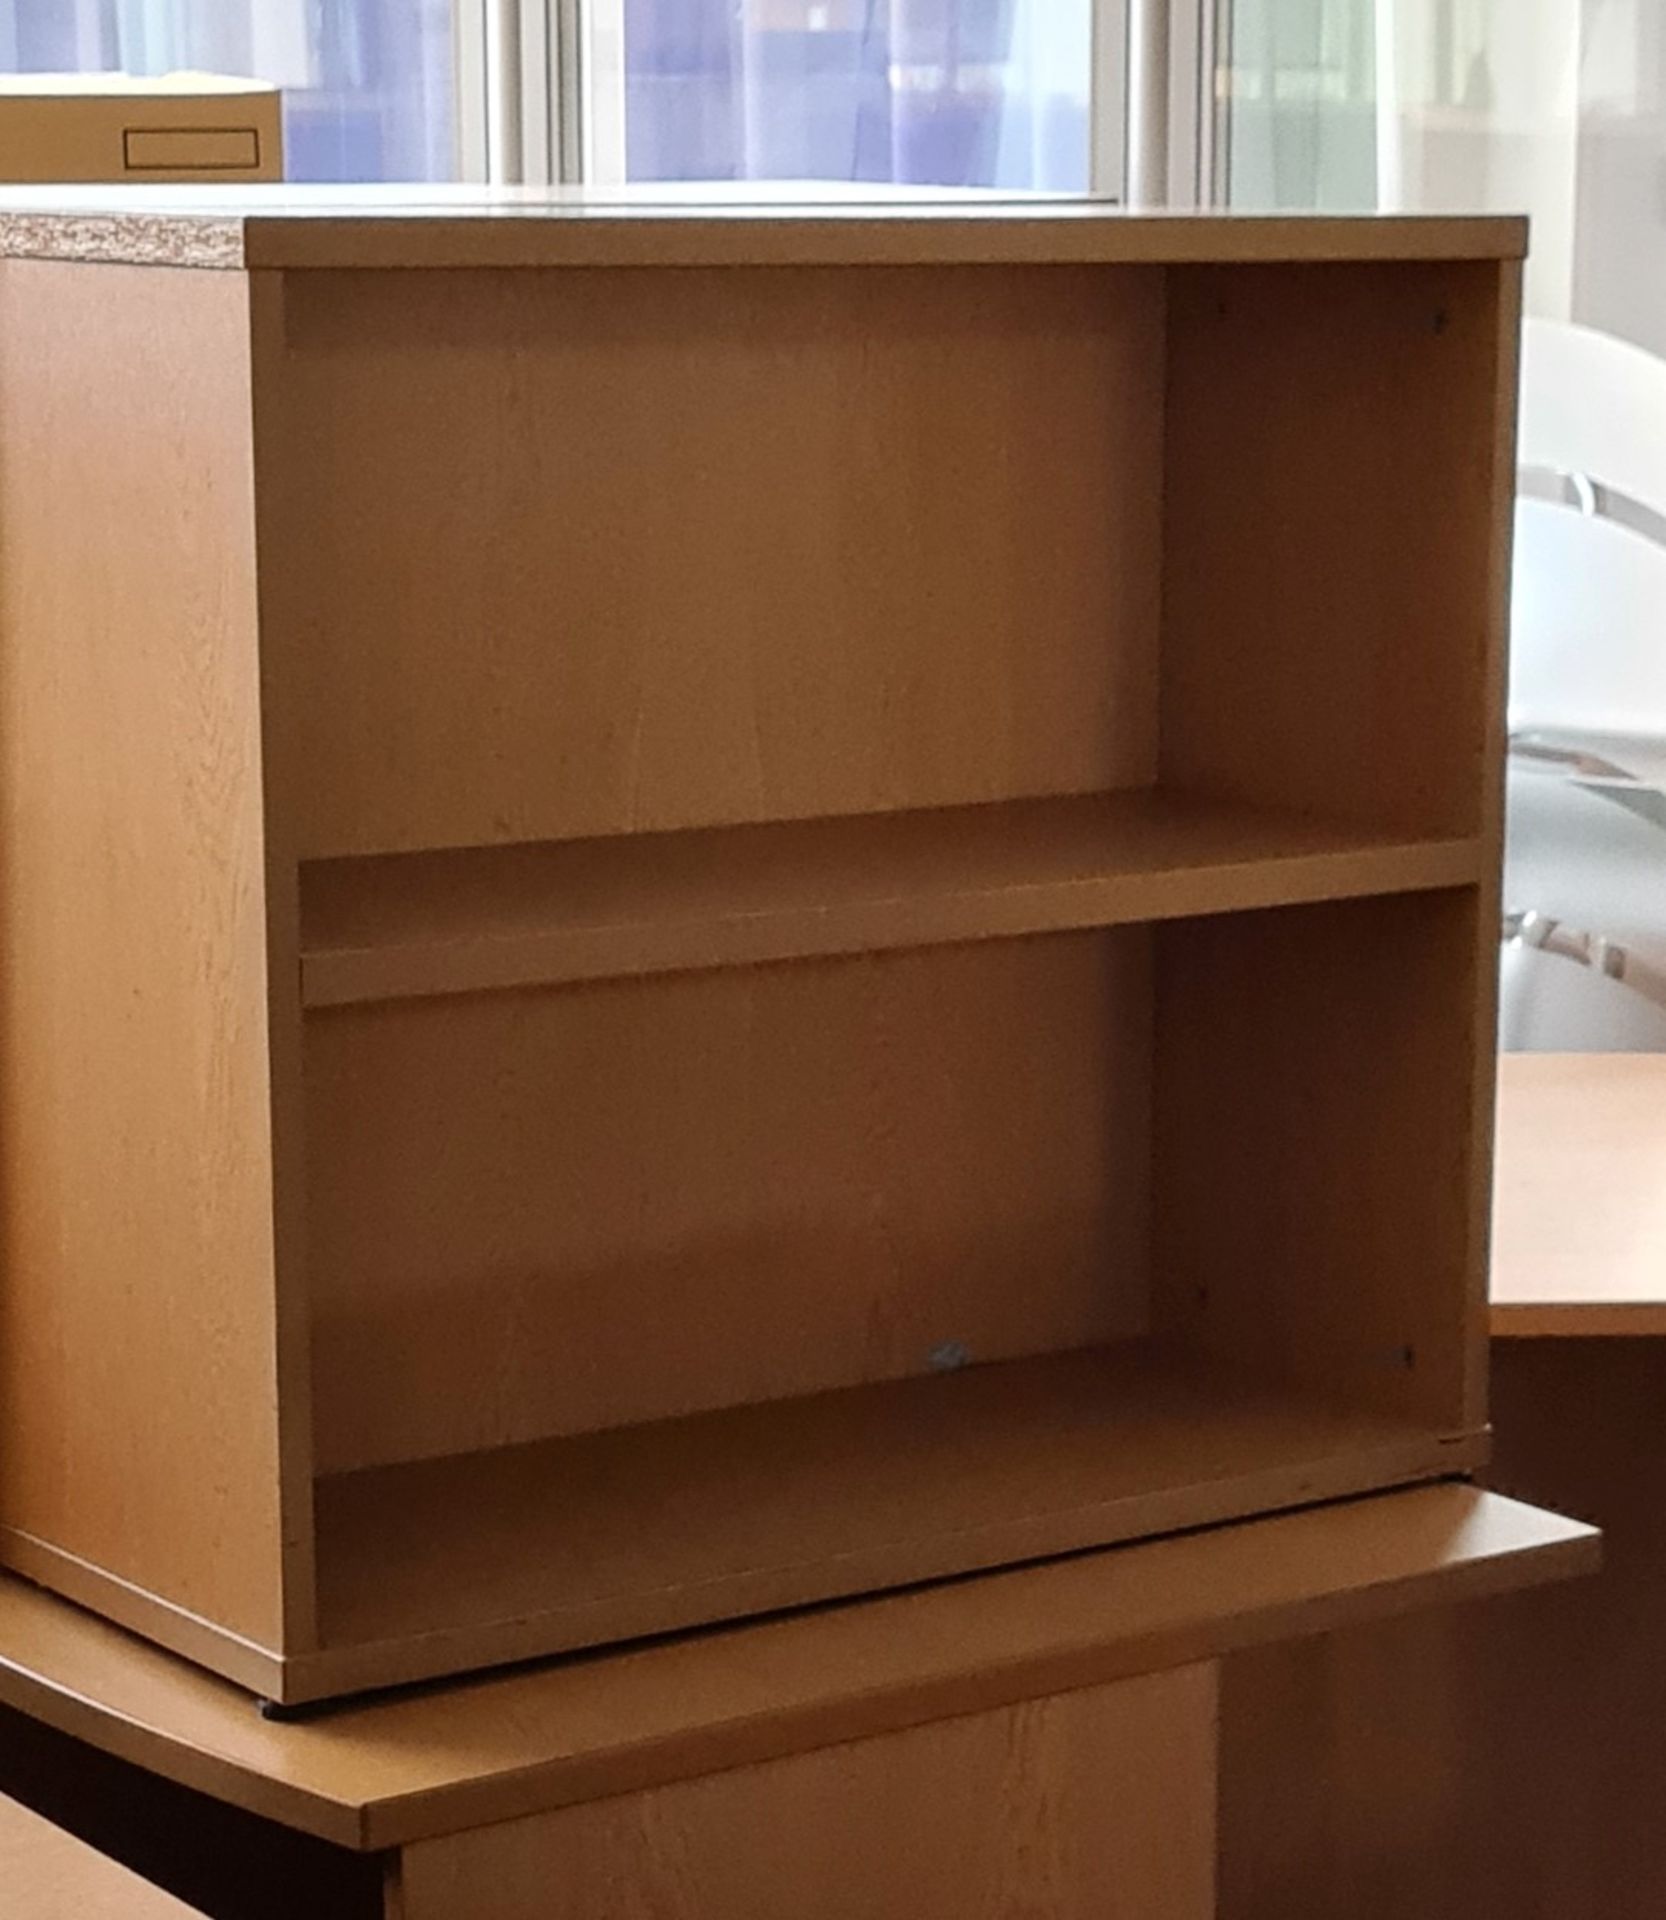 1 x Small Size Office Bookcase - Ref: 1 x PK013 - Location: Site 2, Stafford, ST18Collection Date: